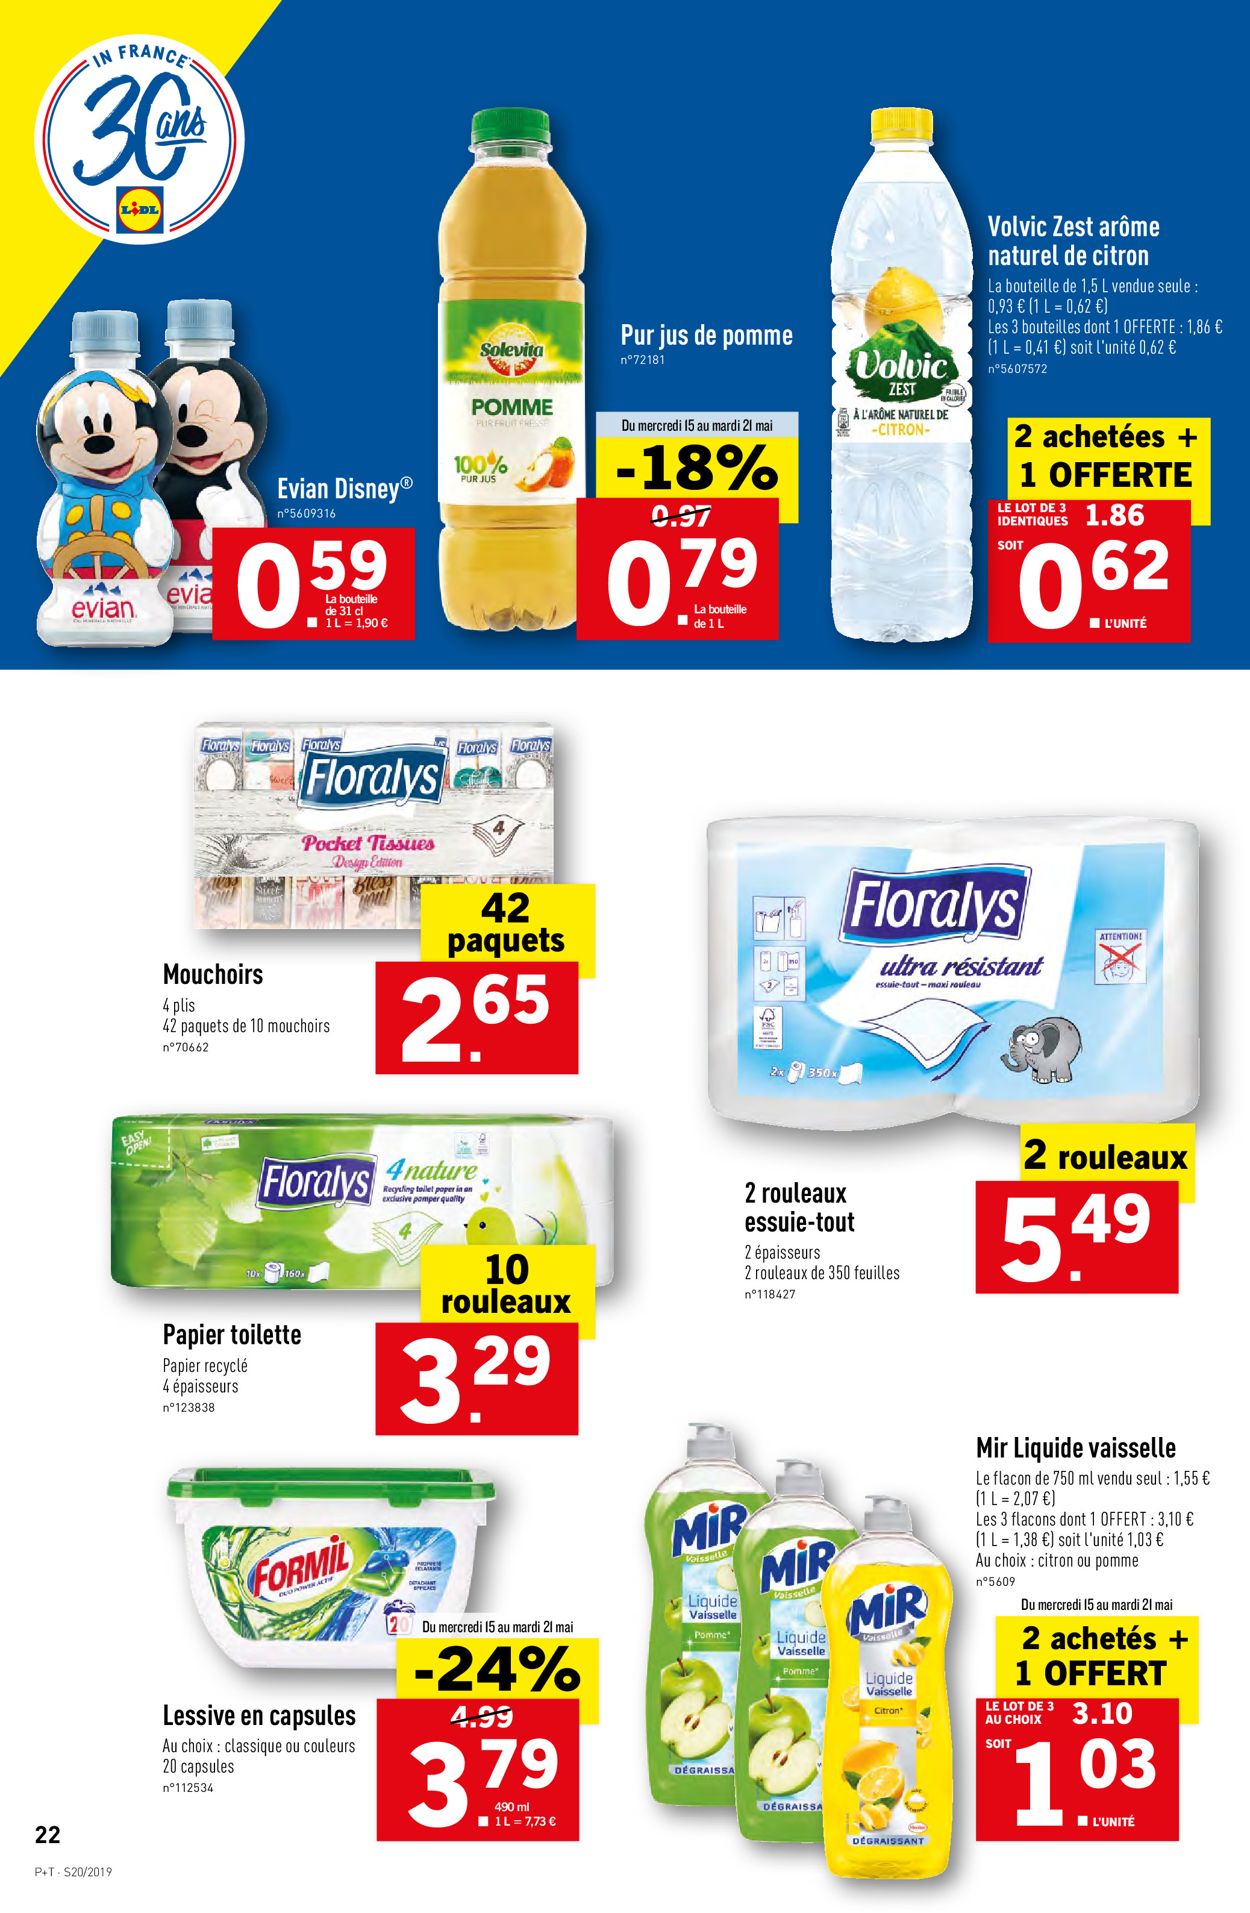 Lidl Catalogue - 15.05-21.05.2019 (Page 22)